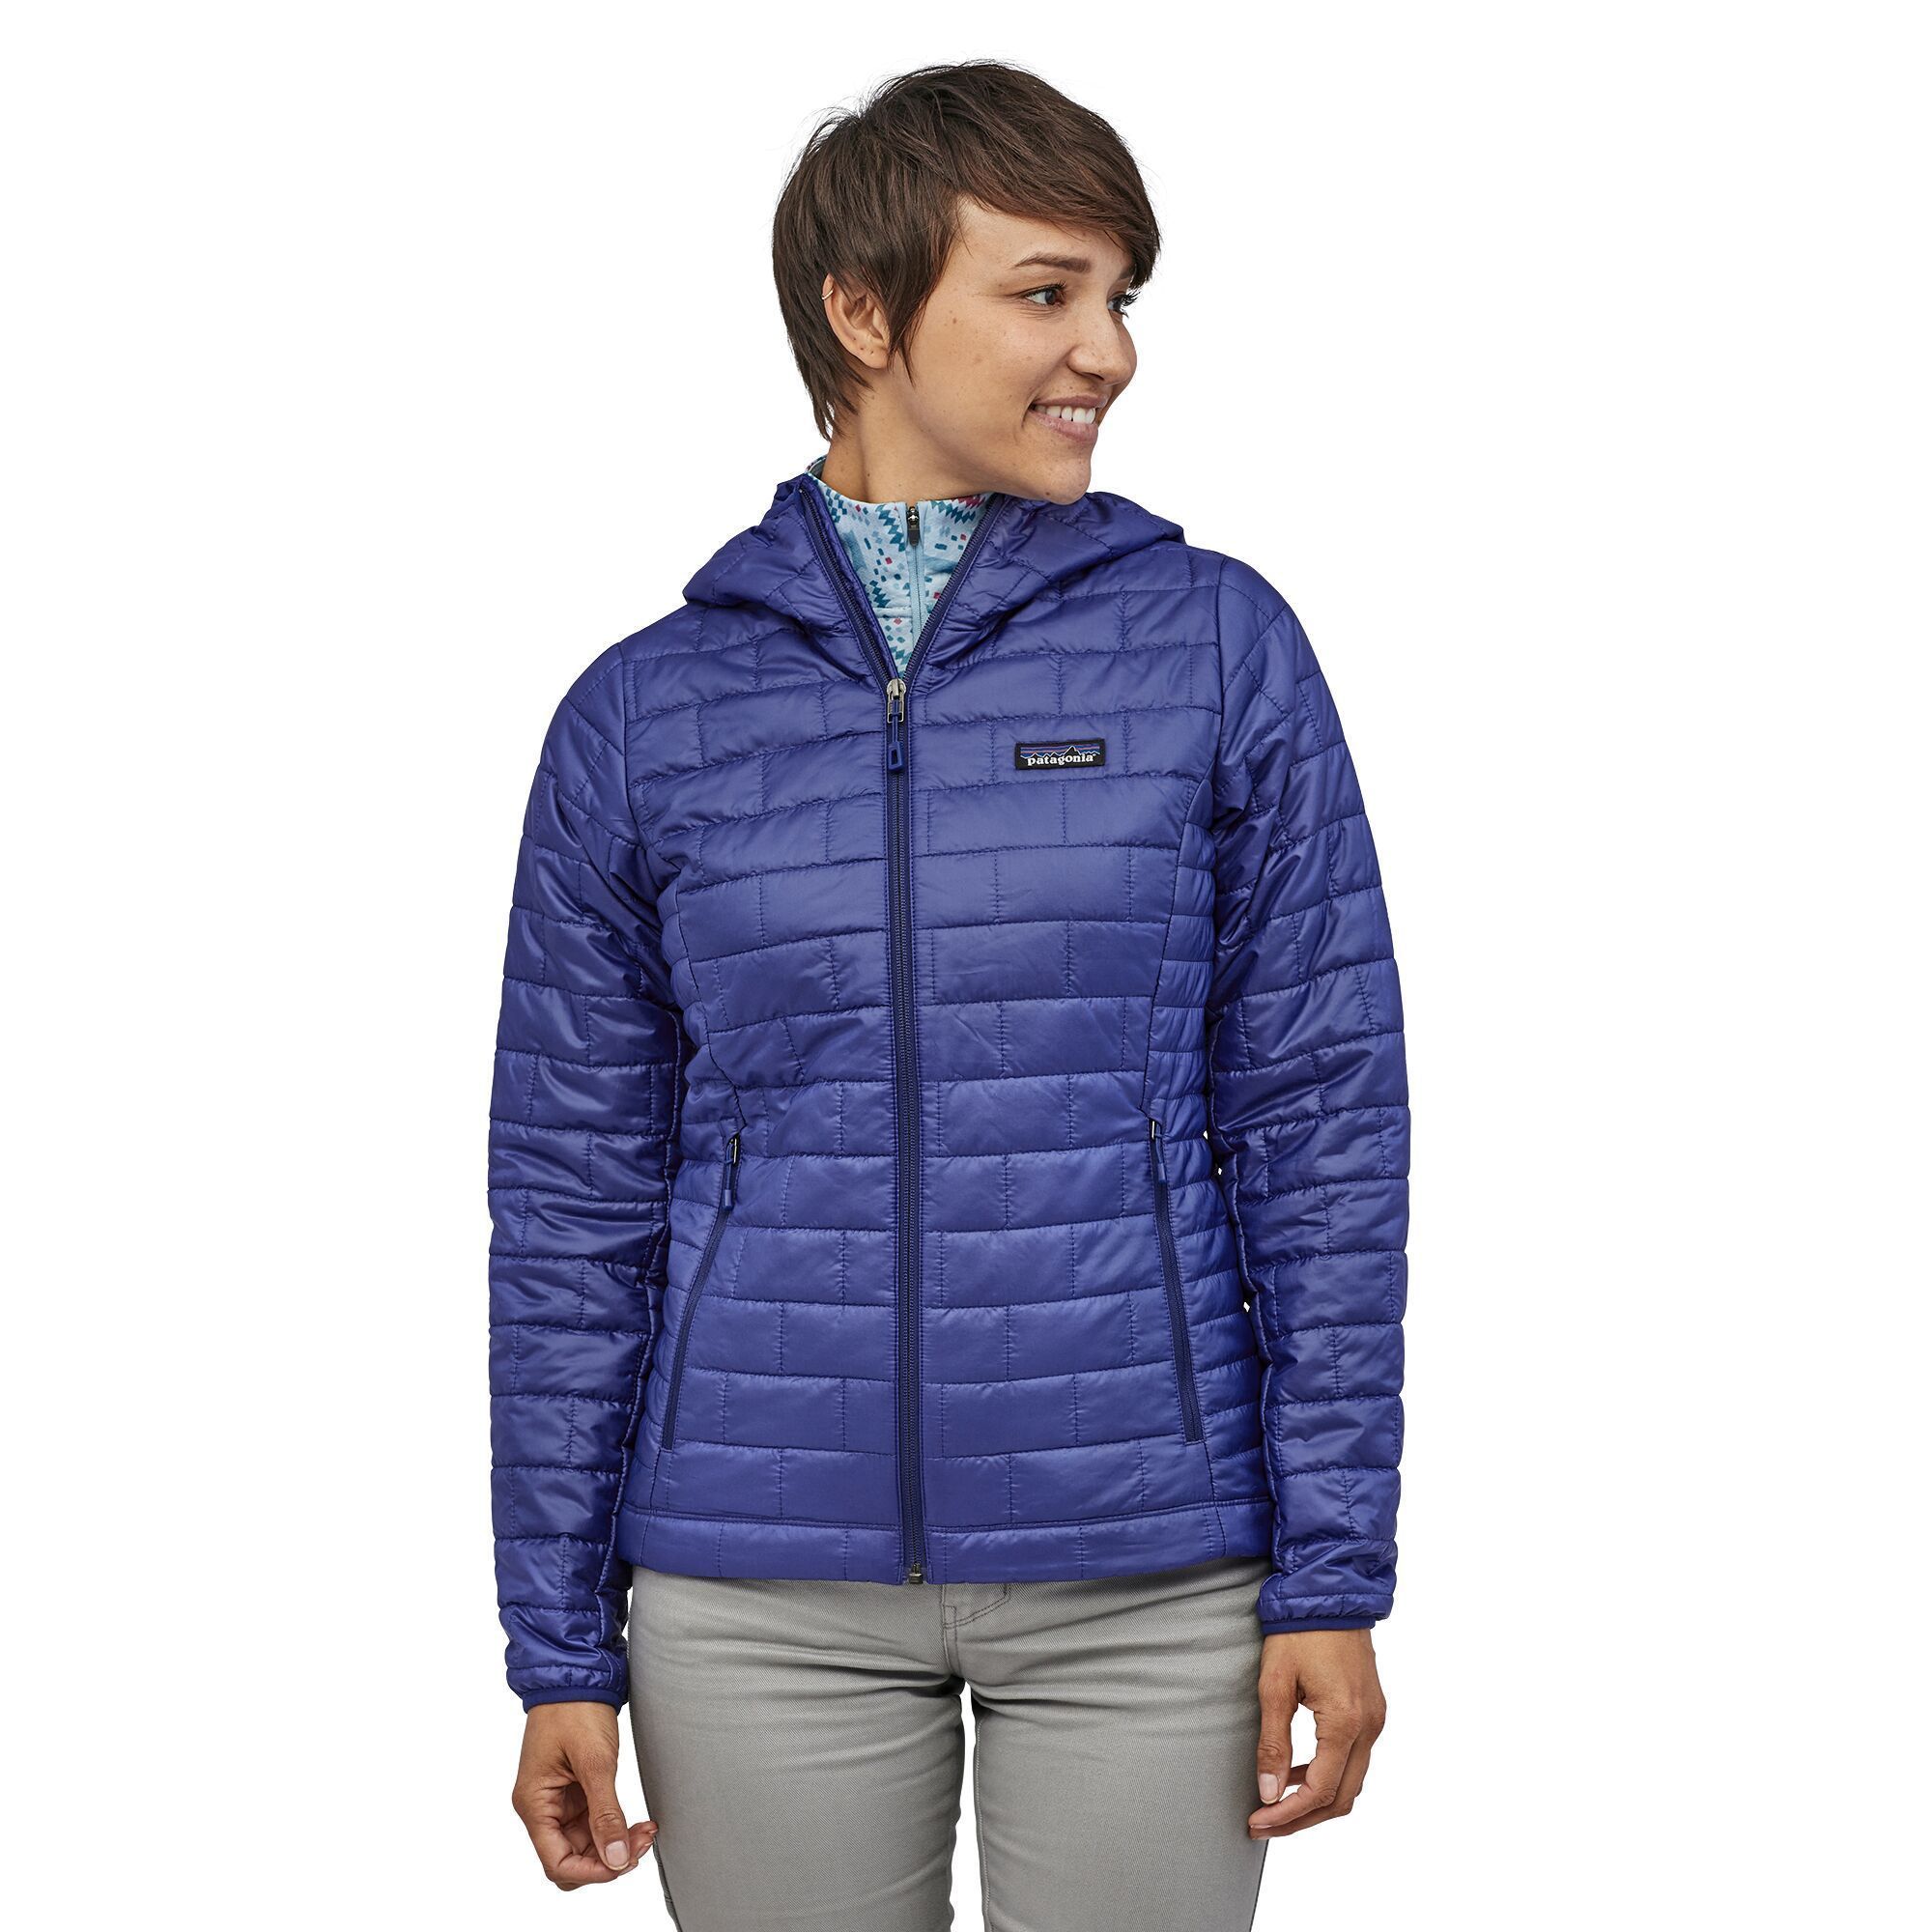 Patagonia Women's Nano Puff® Hoody - Recycled Polyester, Cobalt Blue / M